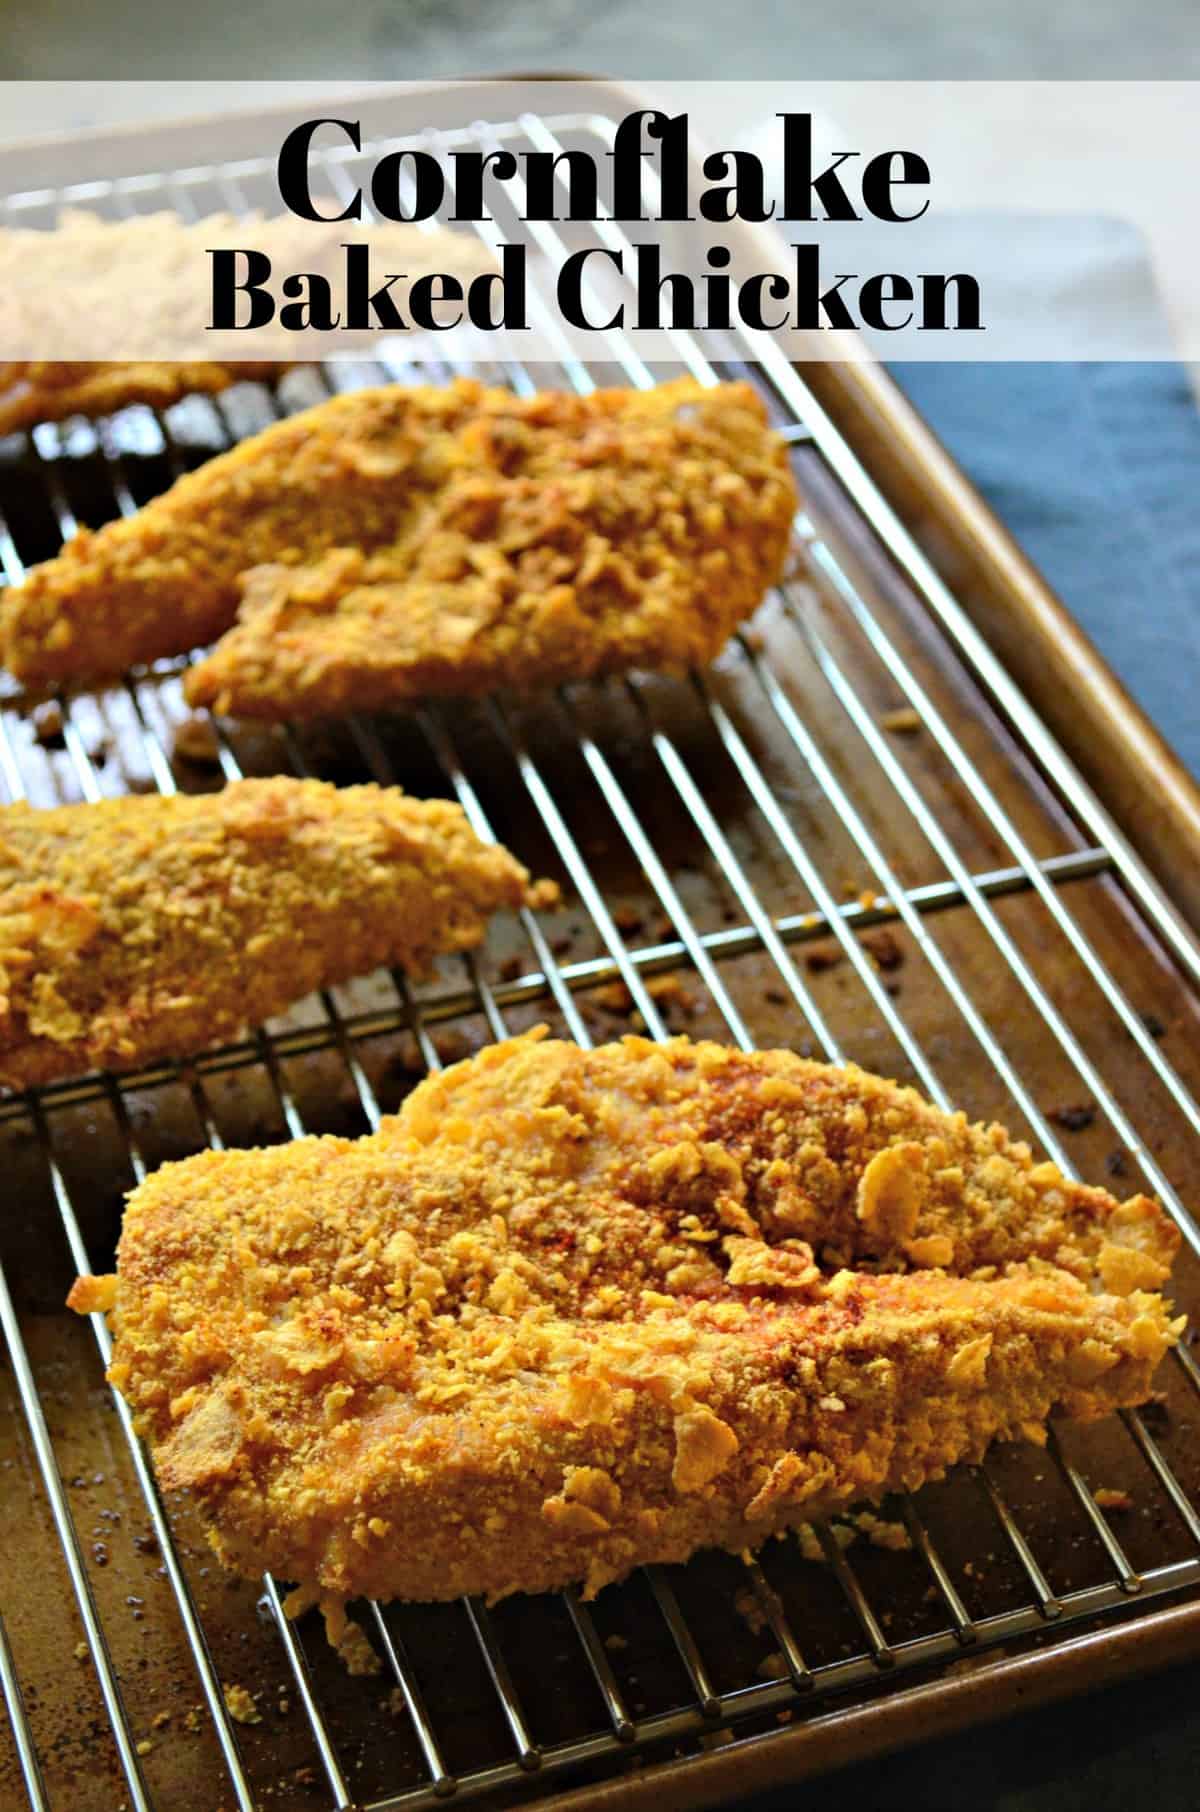 4 large chicken thighs or breasts baked and coated in golden brown corn flakes on rack over top of sheet pan.